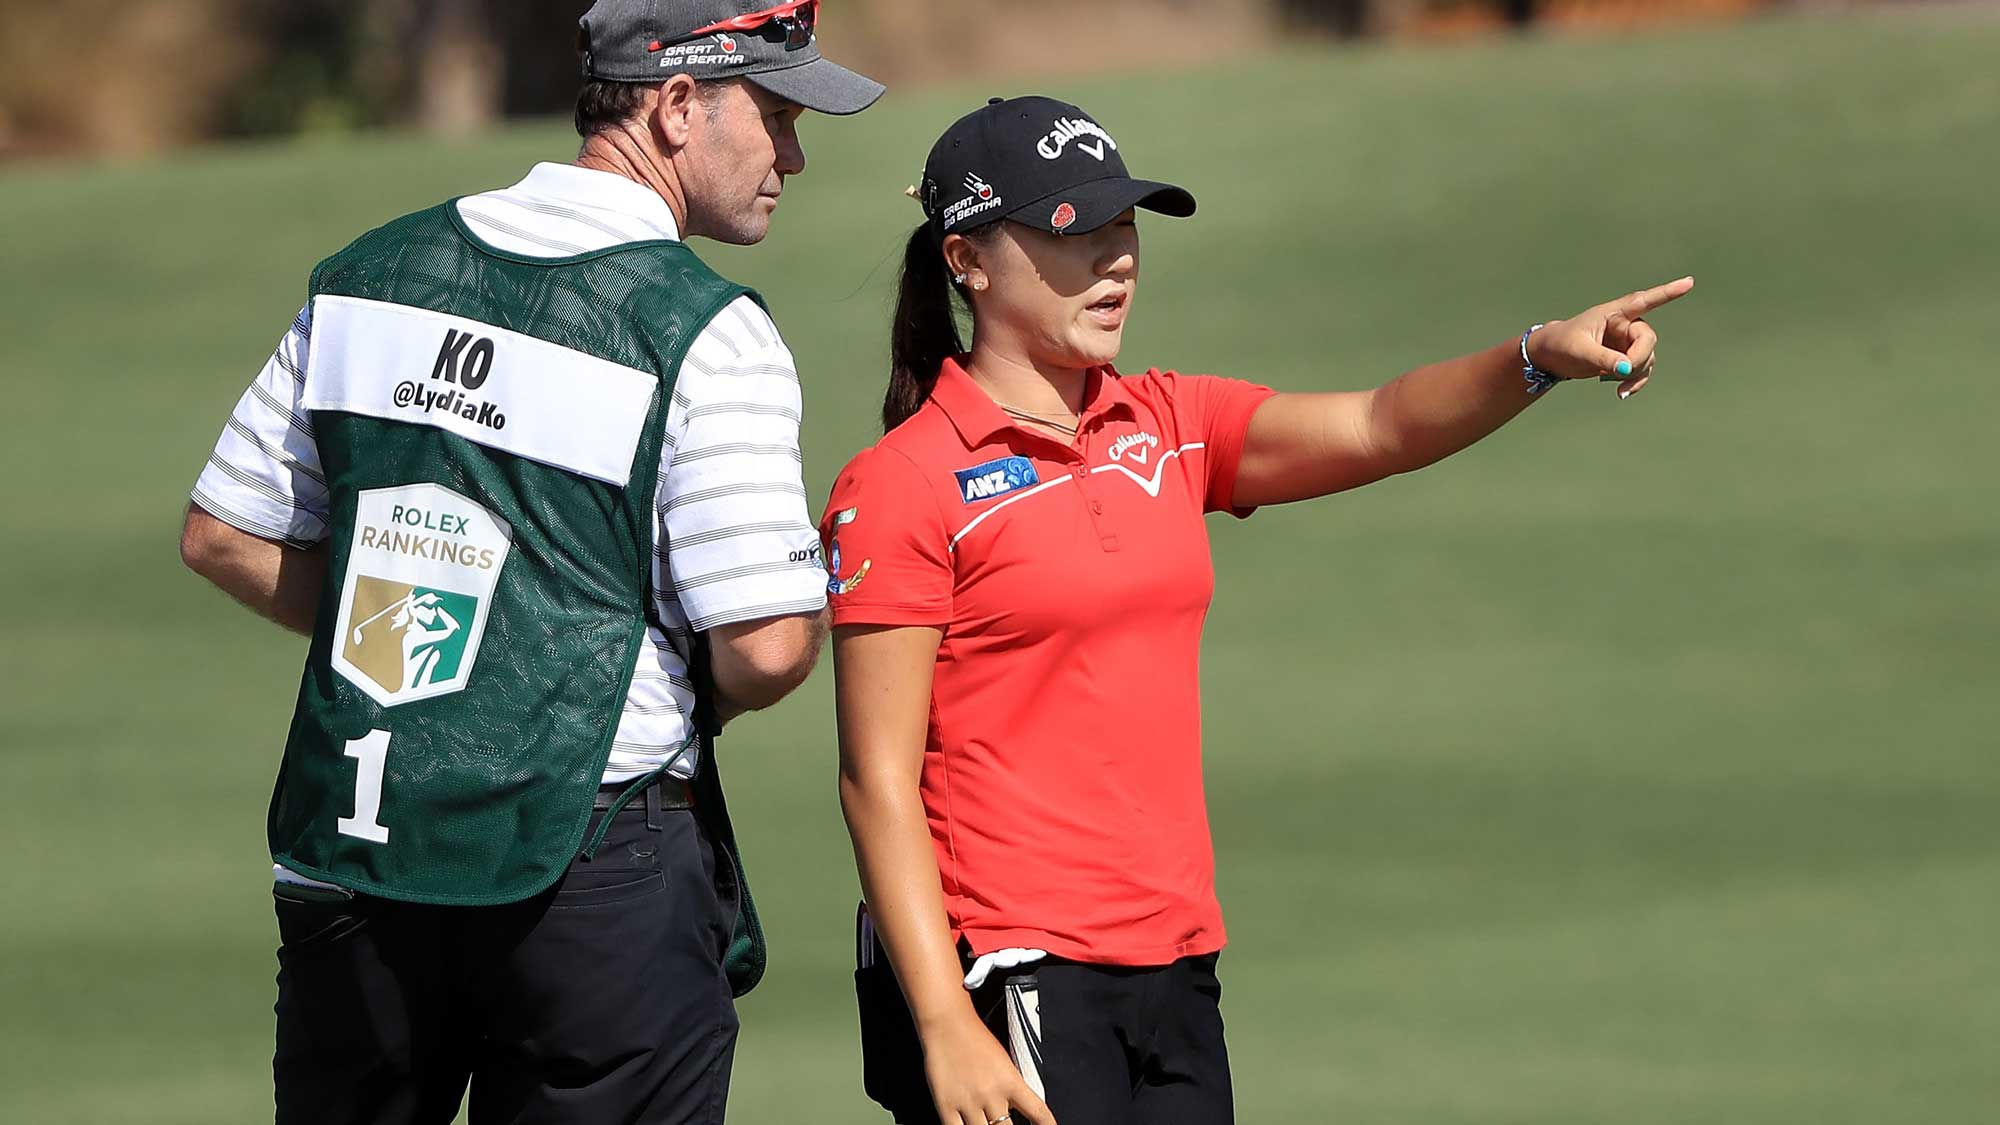 Lydia Ko of New Zealand talks with her caddie on the eighth hole during the second round of the CME Group Tour Championship at Tiburon Golf Club